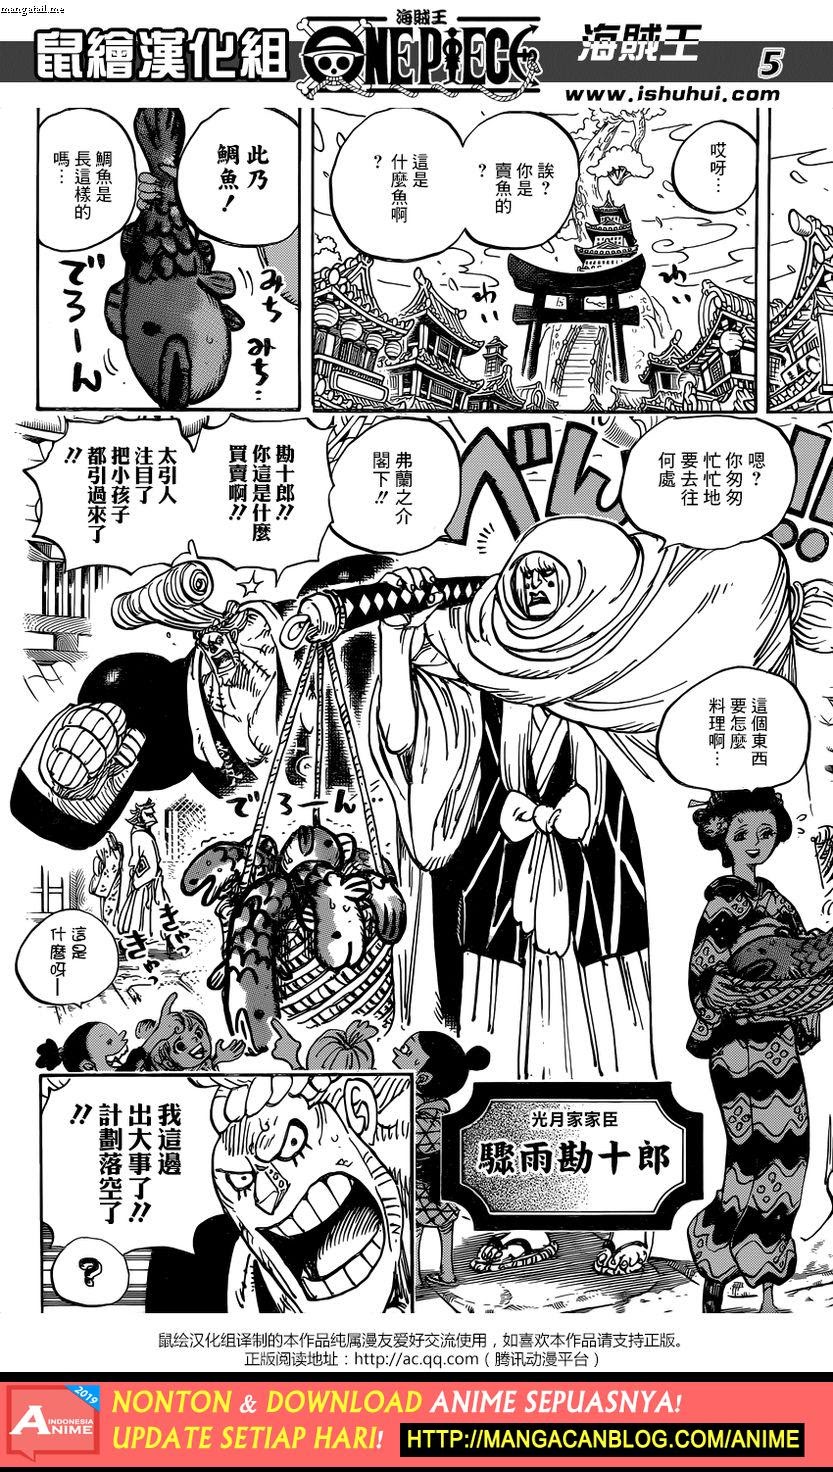 One Piece Chapter 928 – Raw - 99